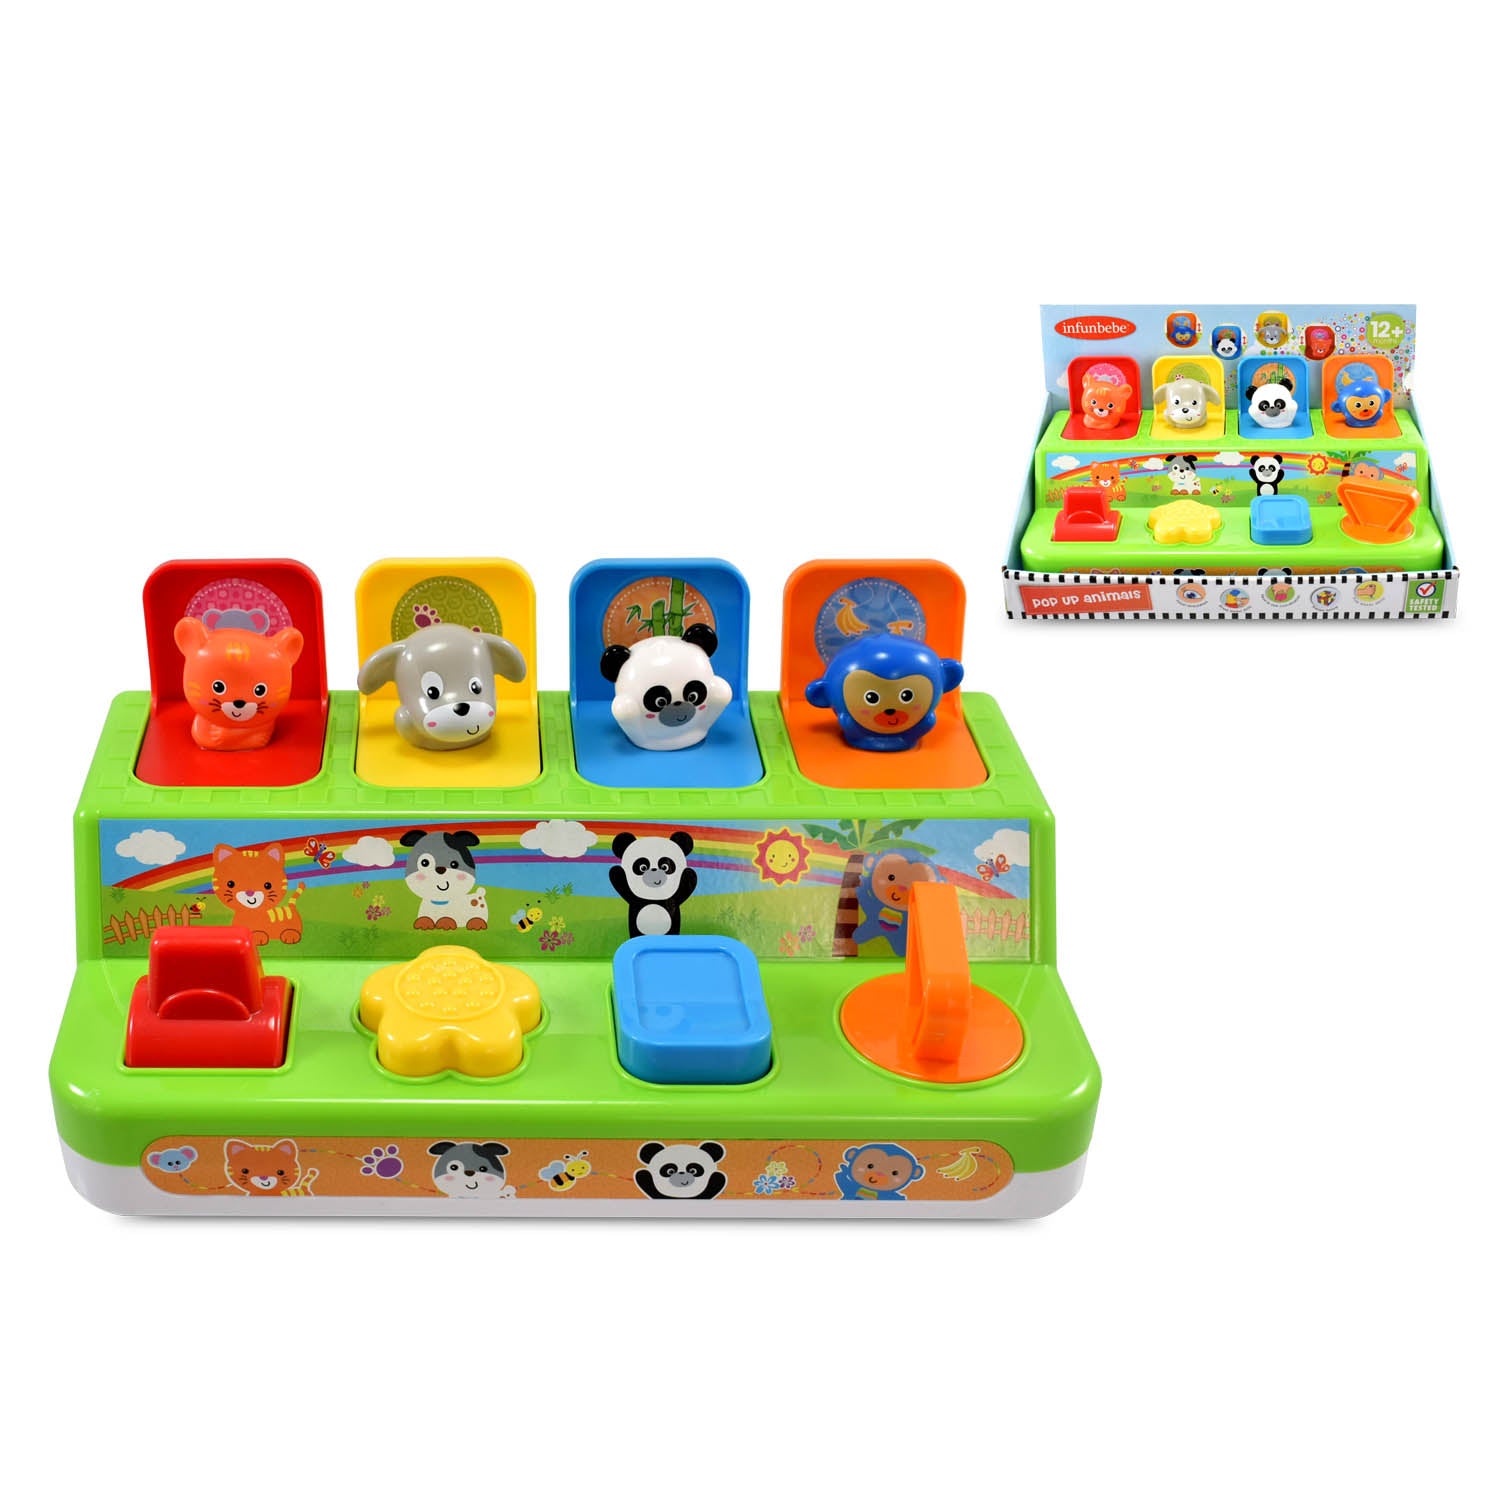 Kids Pop Up Animals Learning Activity Toy